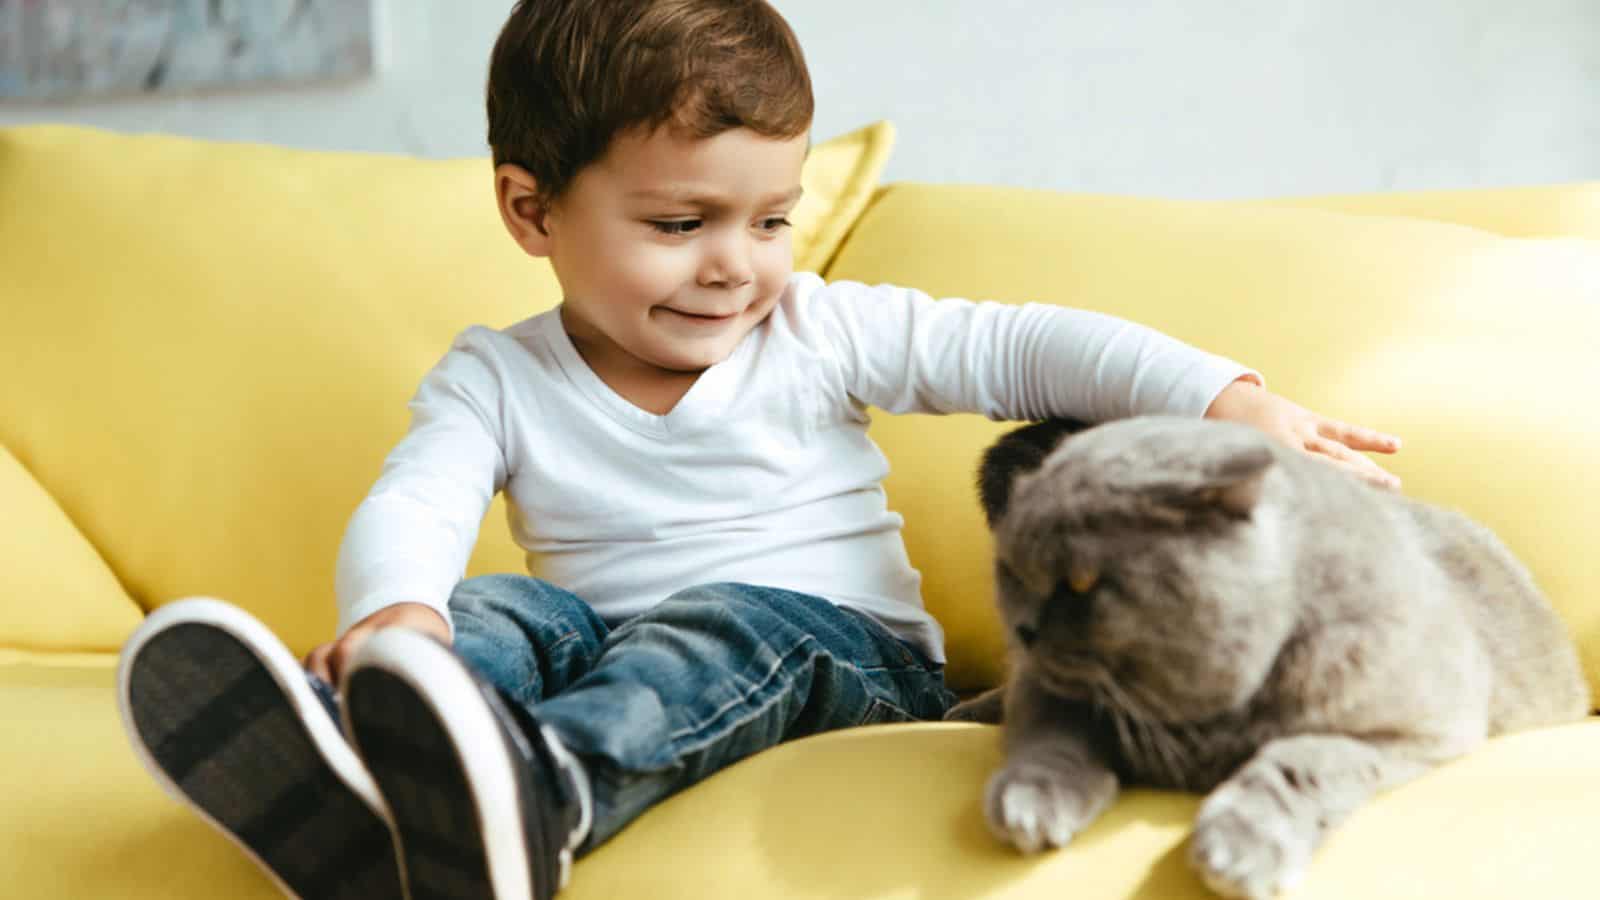 Male toddler petting cat and sitting on yellow sofa at home